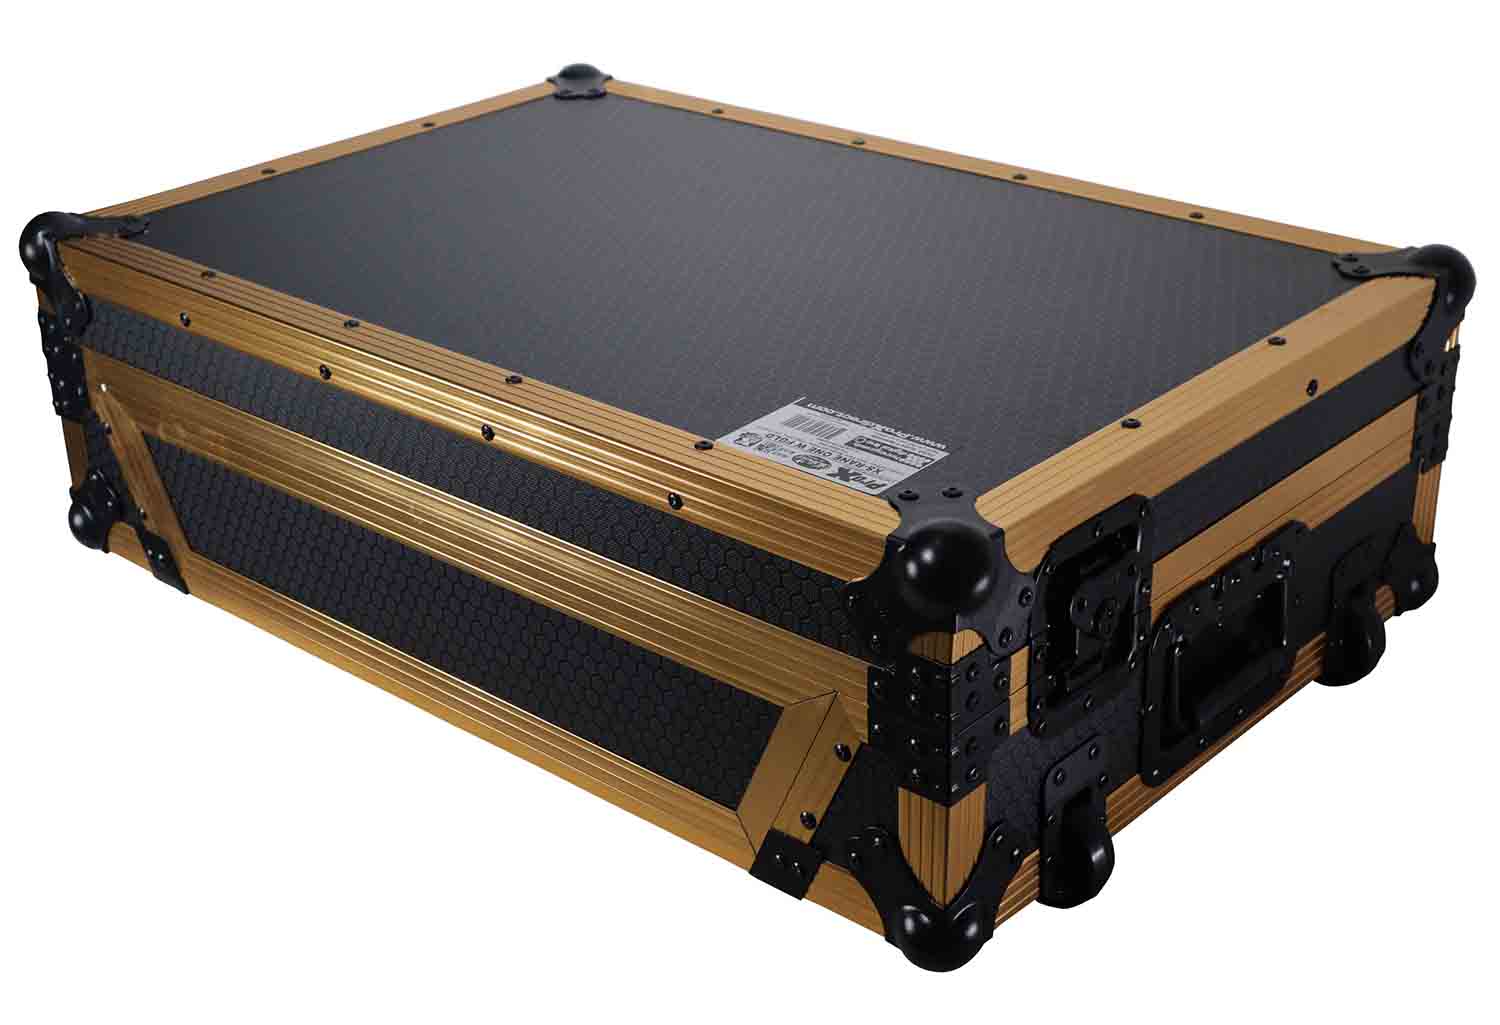 B-Stock: ProX XS-RANEONE W FGLD ATA Flight Style Road Case for RANE ONE DJ Controller with Wheels Limited Edition Gold - Hollywood DJ